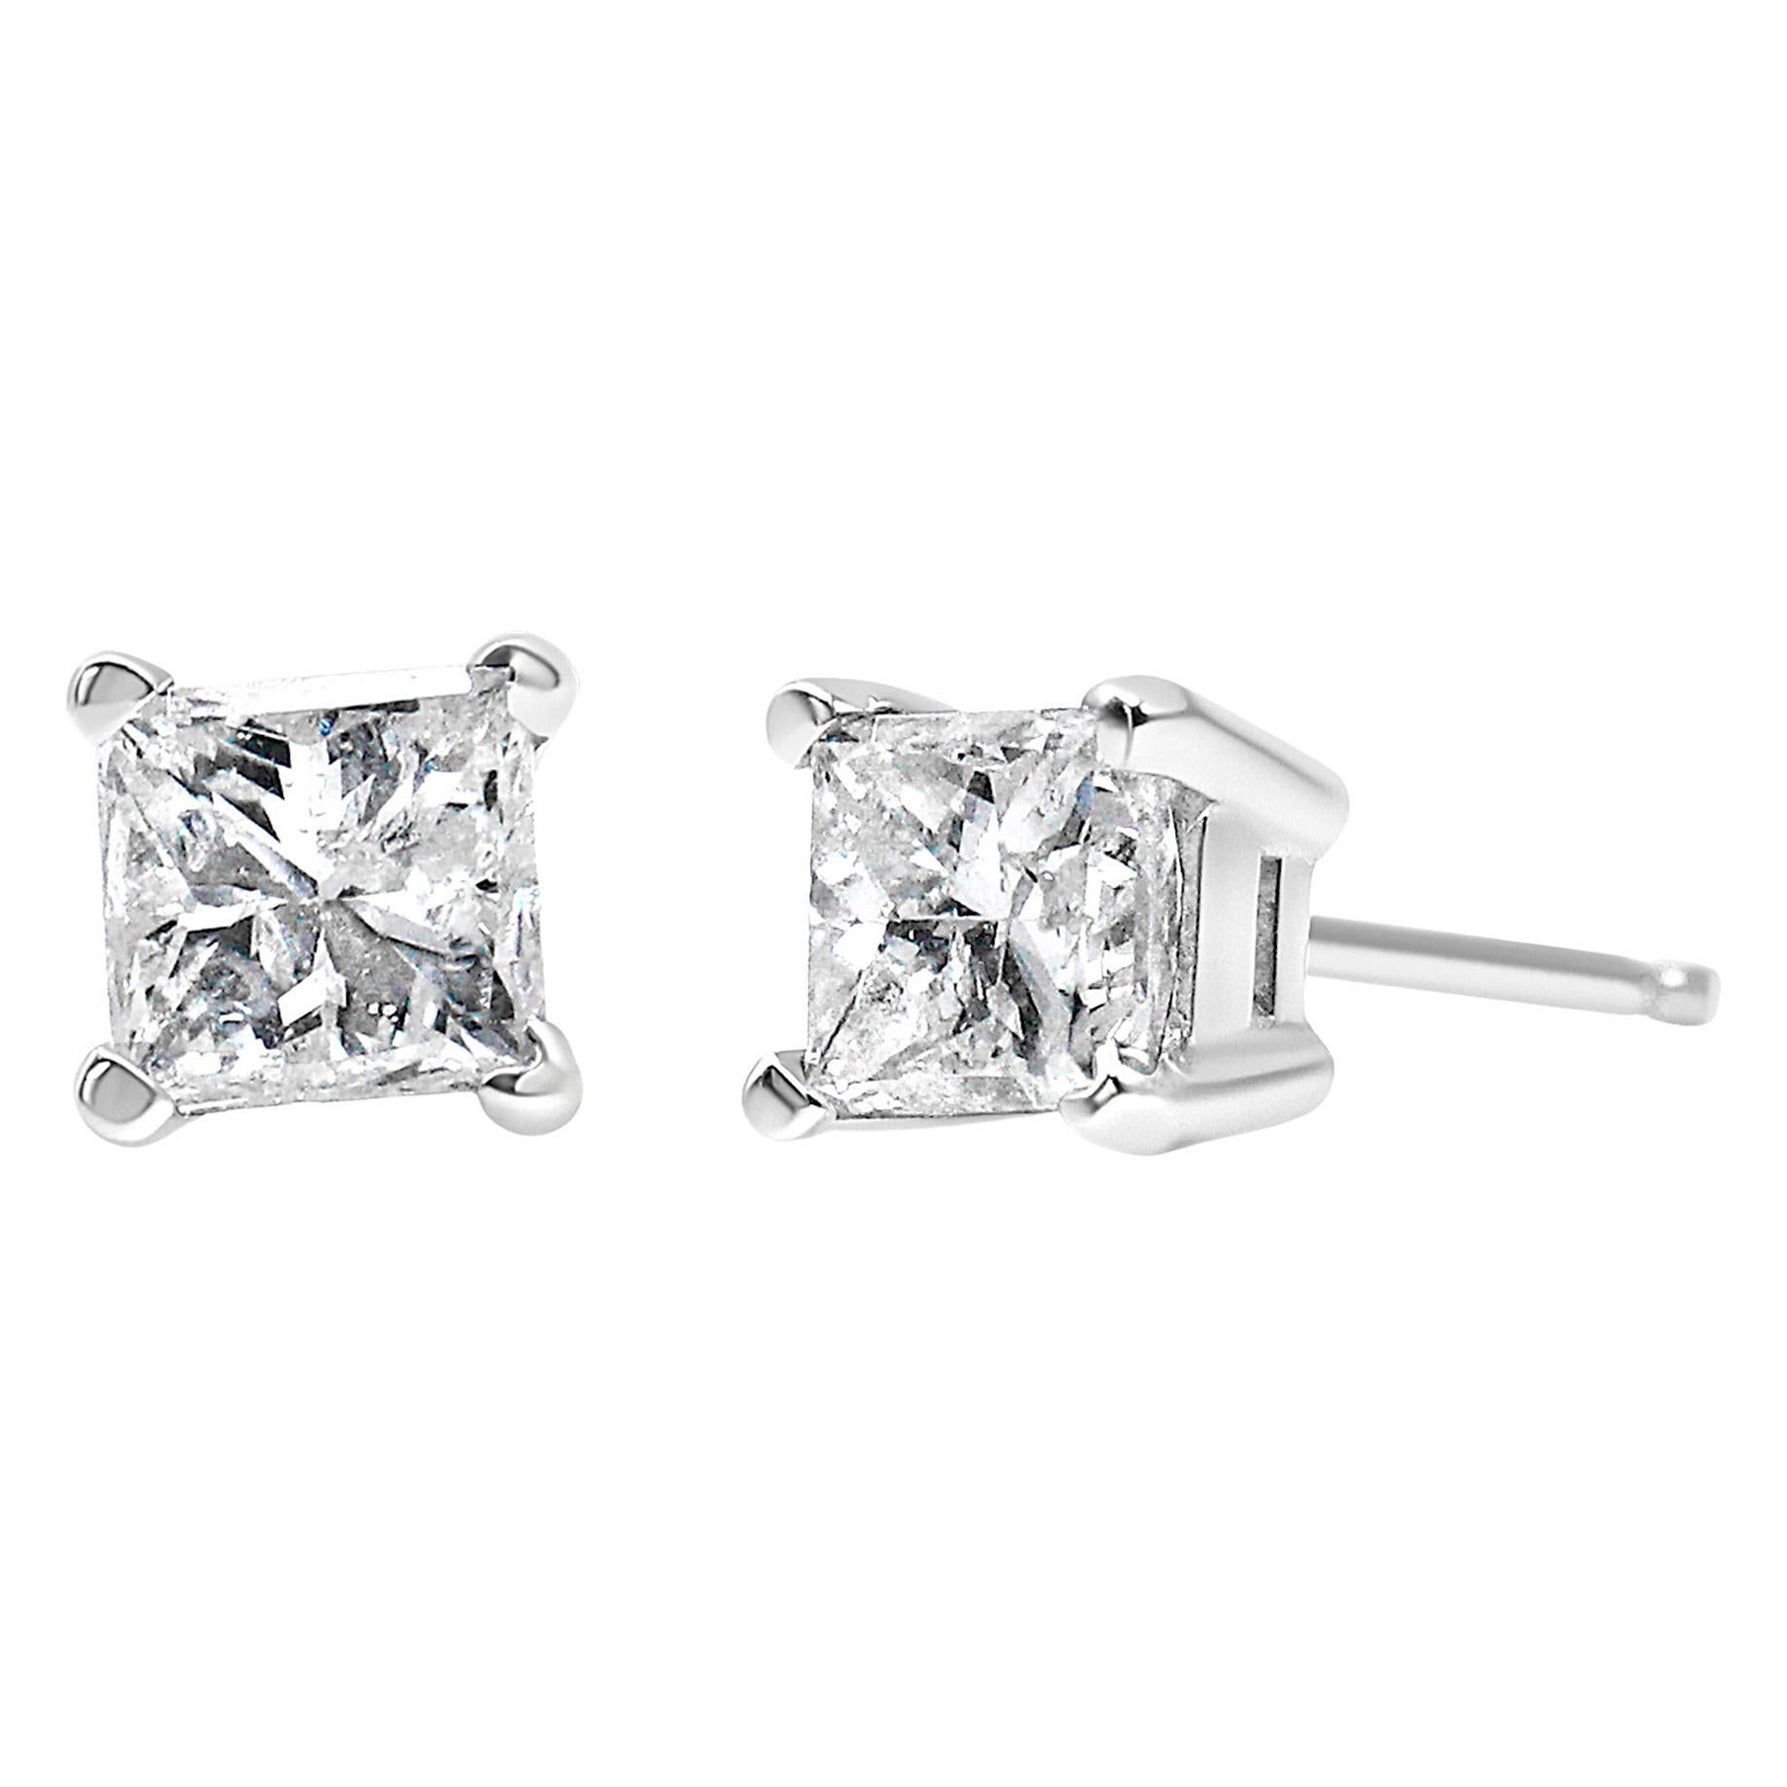 14K White Gold 1.0 Carat Square Near Colorless Diamond Solitaire Stud Earrings